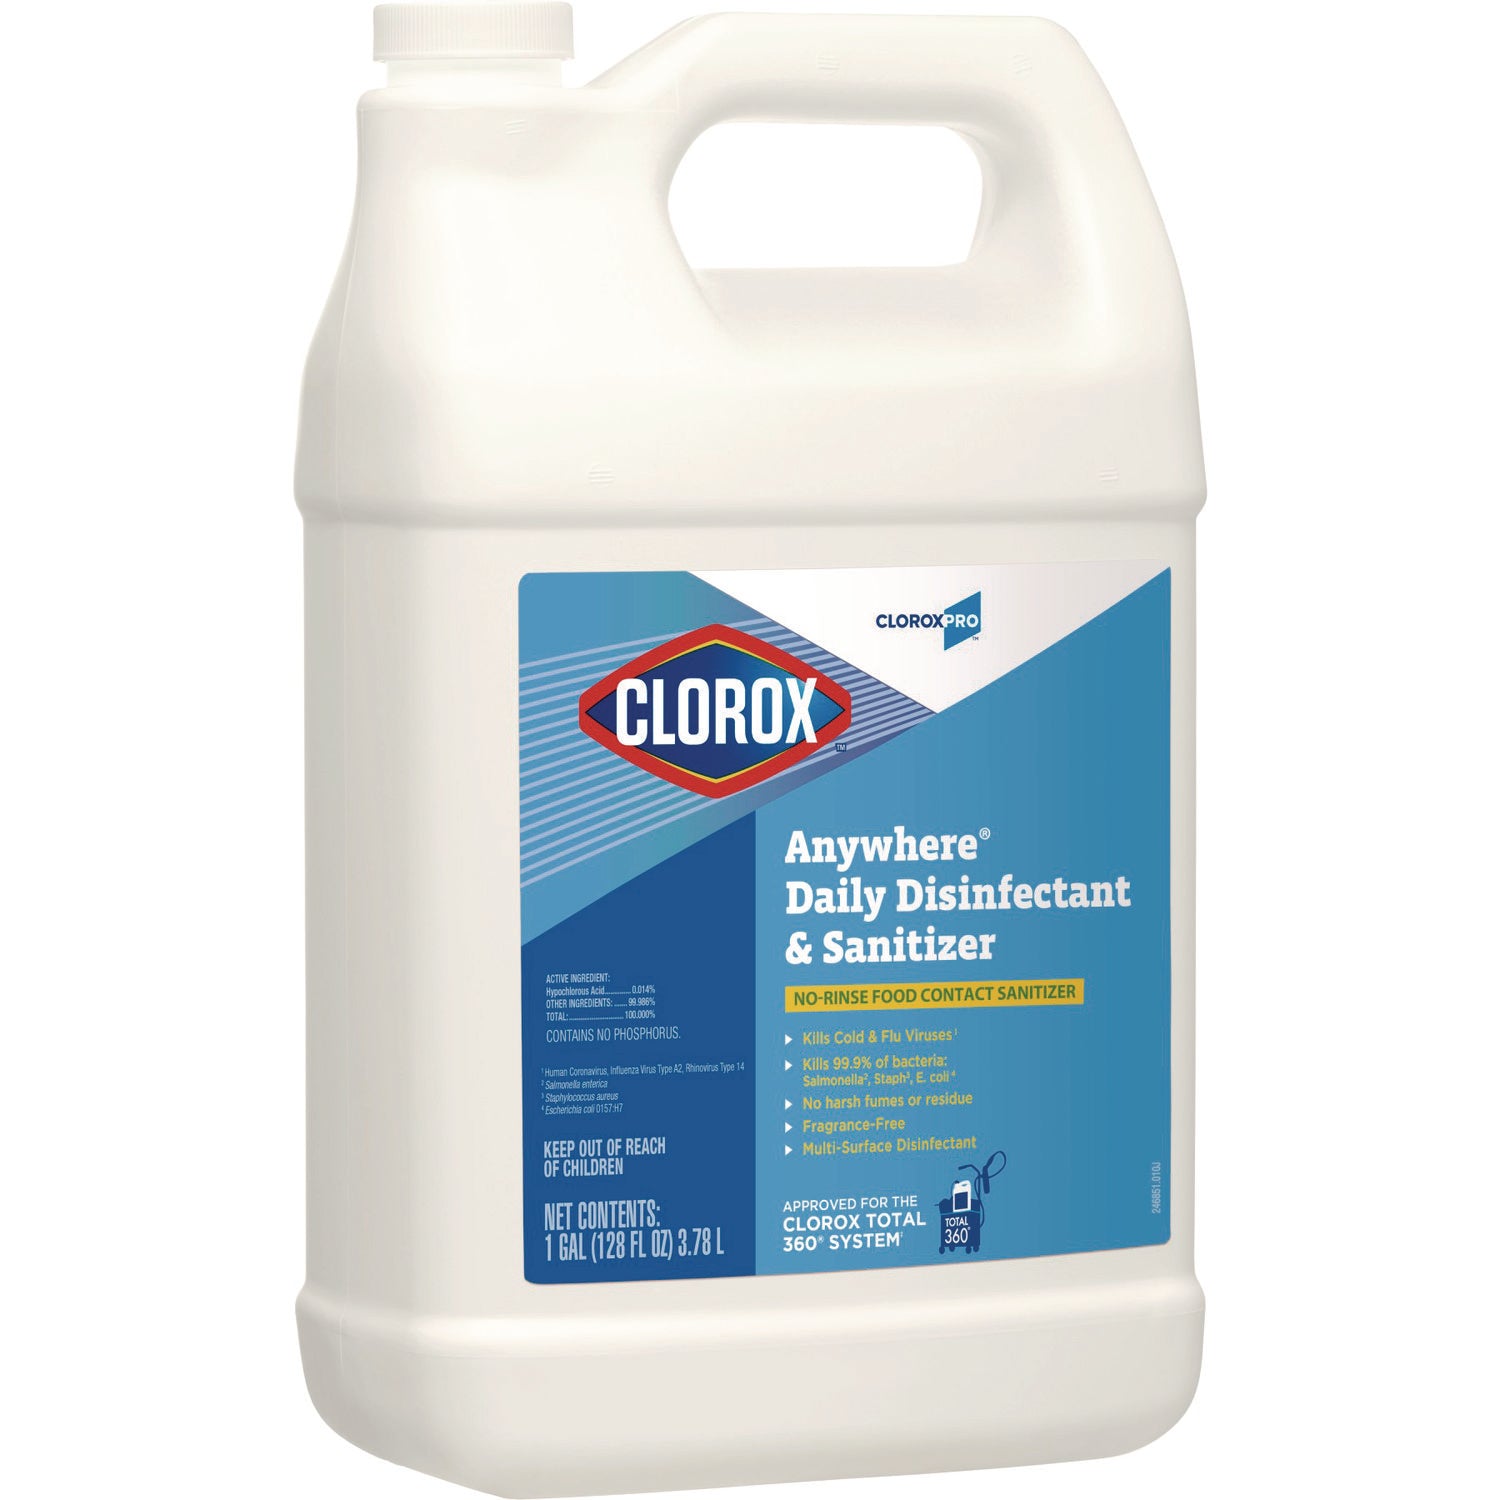 CloroxPro Anywhere Daily Disinfectant and Sanitizing Bottle - 128 fl oz (4 quart) - 1 Each - Disinfectant, Deodorize, pH Balanced - Translucent - 2